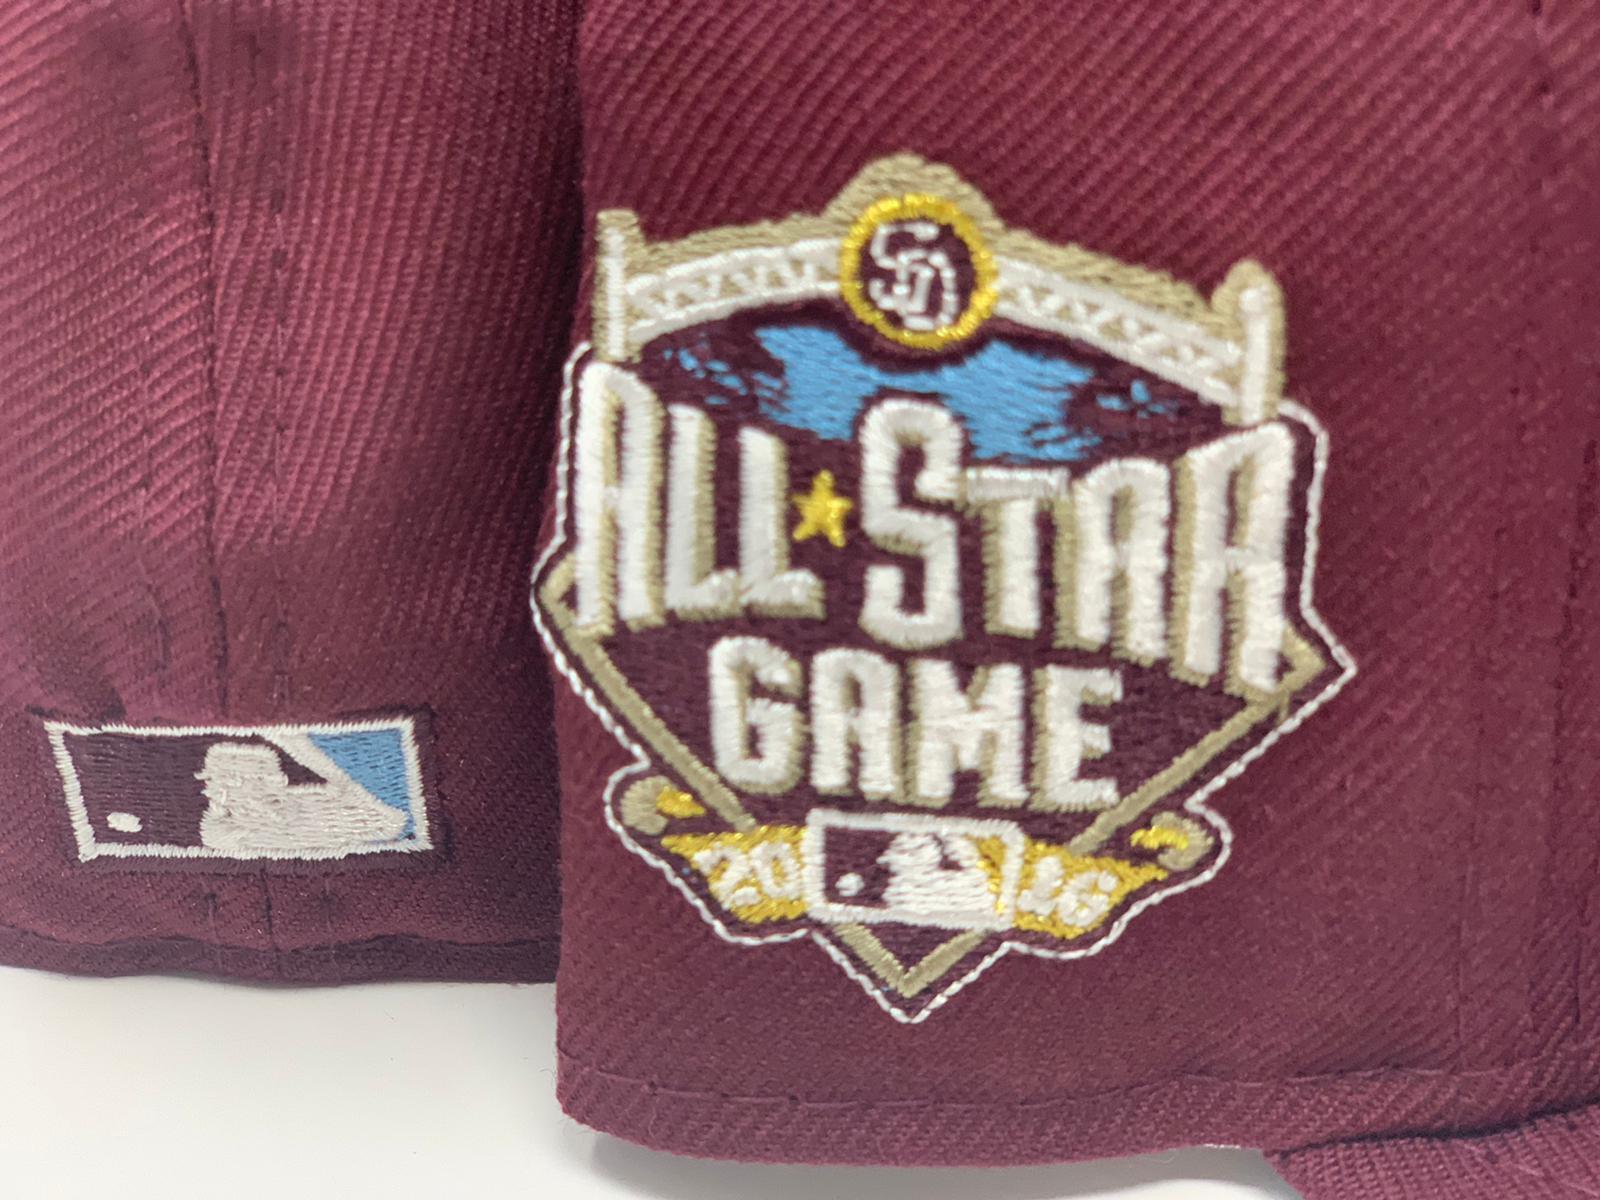 2016 mlb all star game hats